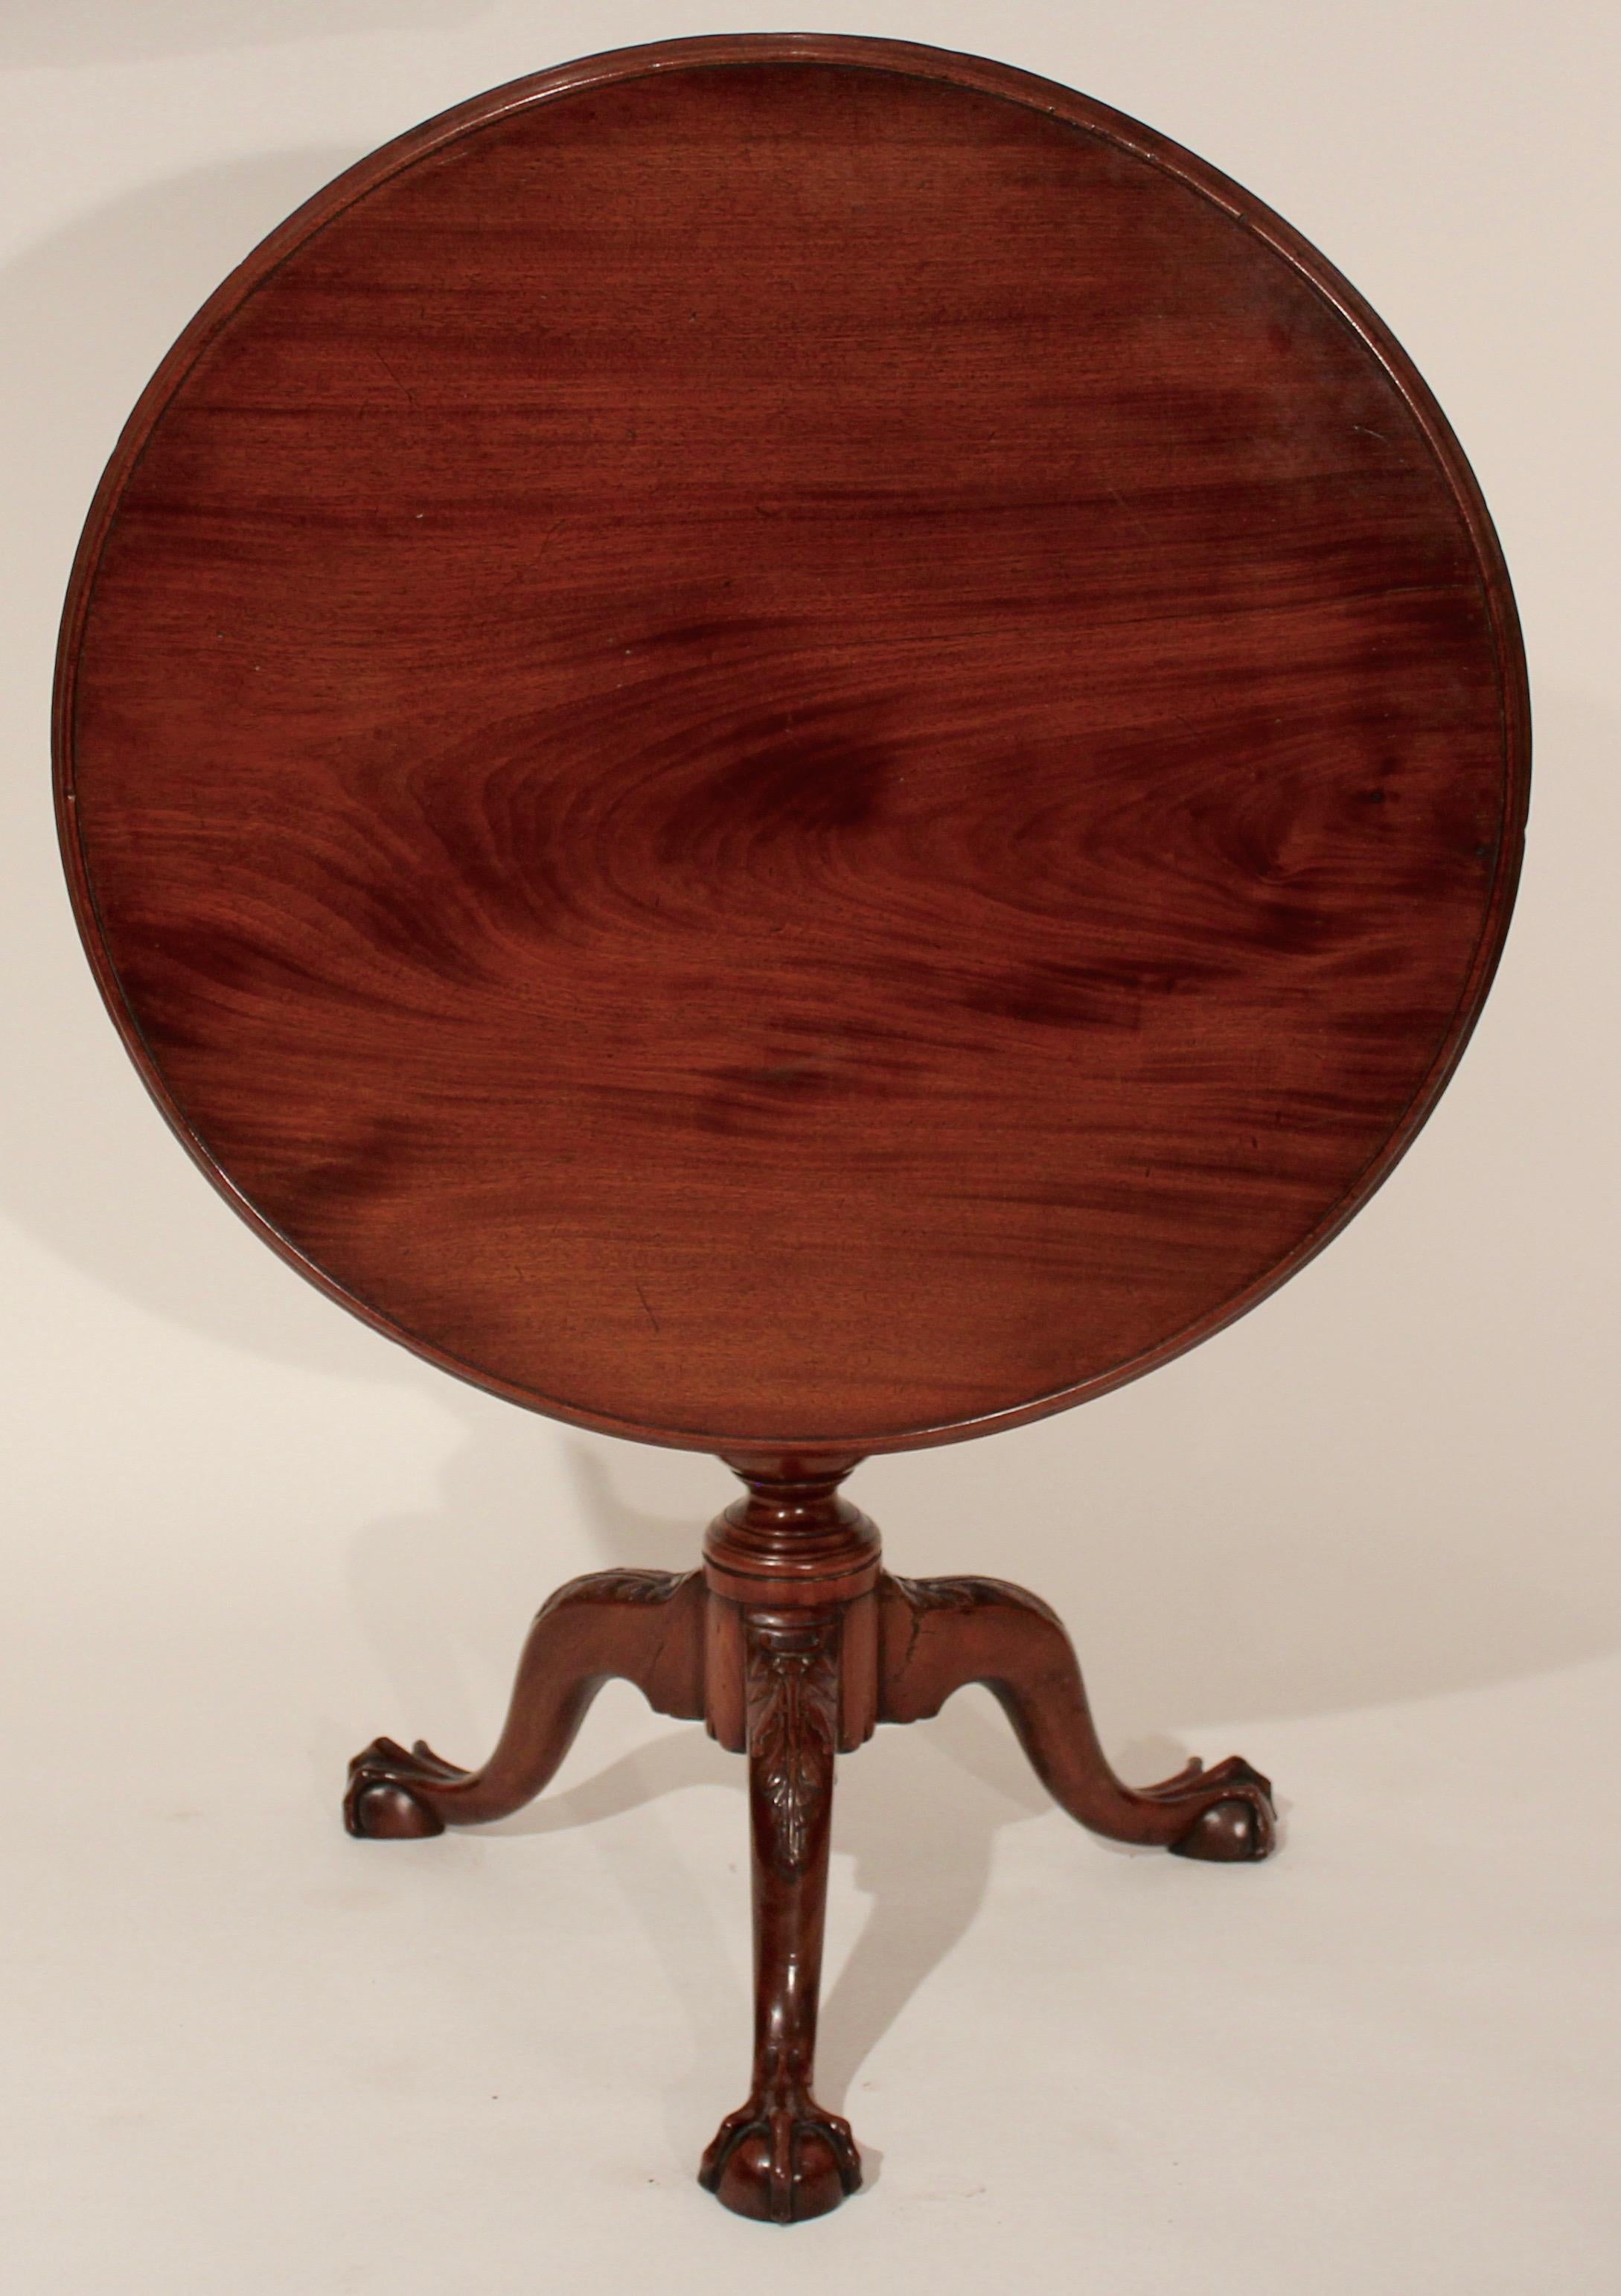 Excellent Philadelphia mahogany Chippendale tea table with dish top suppressed ball pedestal acanthus carved legs and terminating in claw and ball feet.